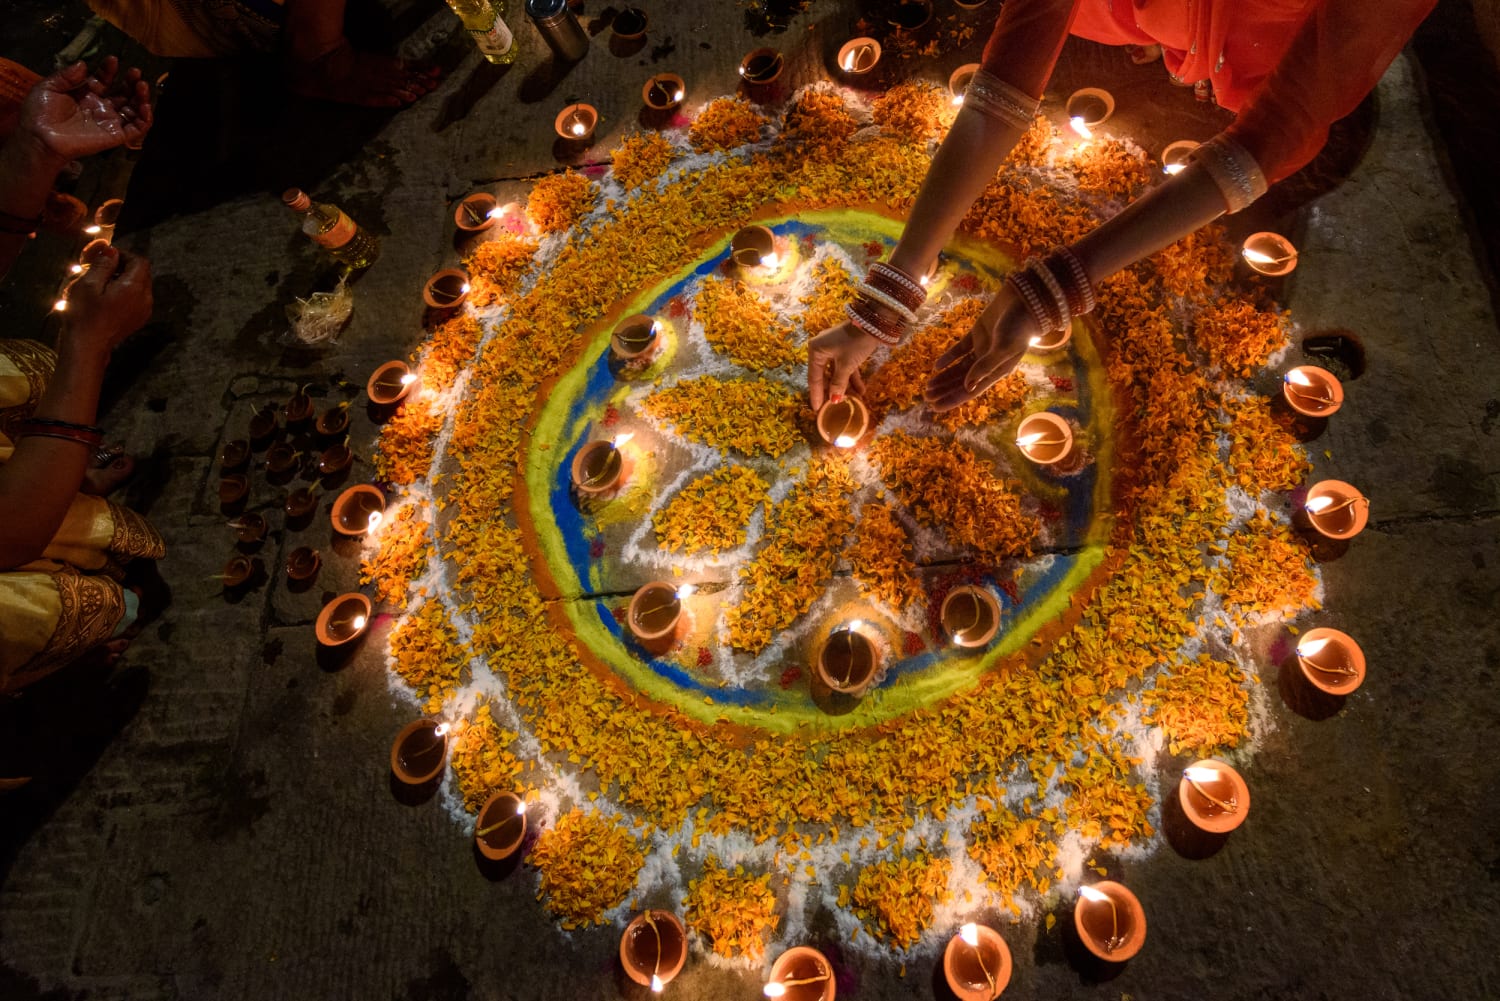 Digital Diwali: How U.S. for Indian festival of lights pivoted this